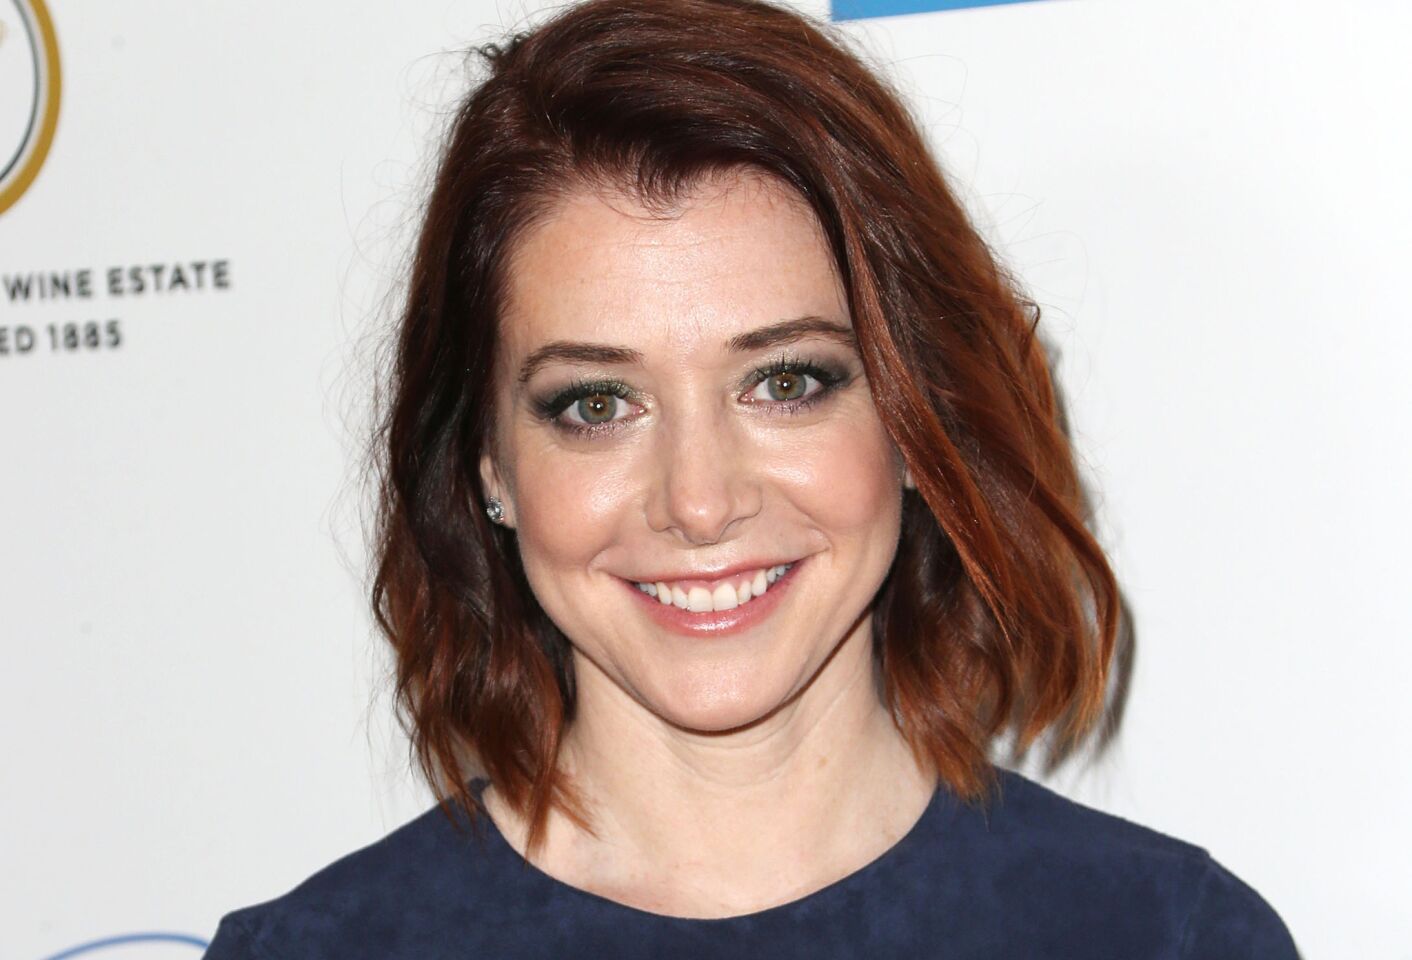 Kids, in the summer of 2012, your Aunt Lily had a baby. Well, her real-life counterpart, Alyson Hannigan, and hubby Alexis Denisof had one, anyway. The "How I Met Your Mother" actress and her husband welcomed their baby girl, Keeva Jane Denisof, on May 23. Read the Full story here.